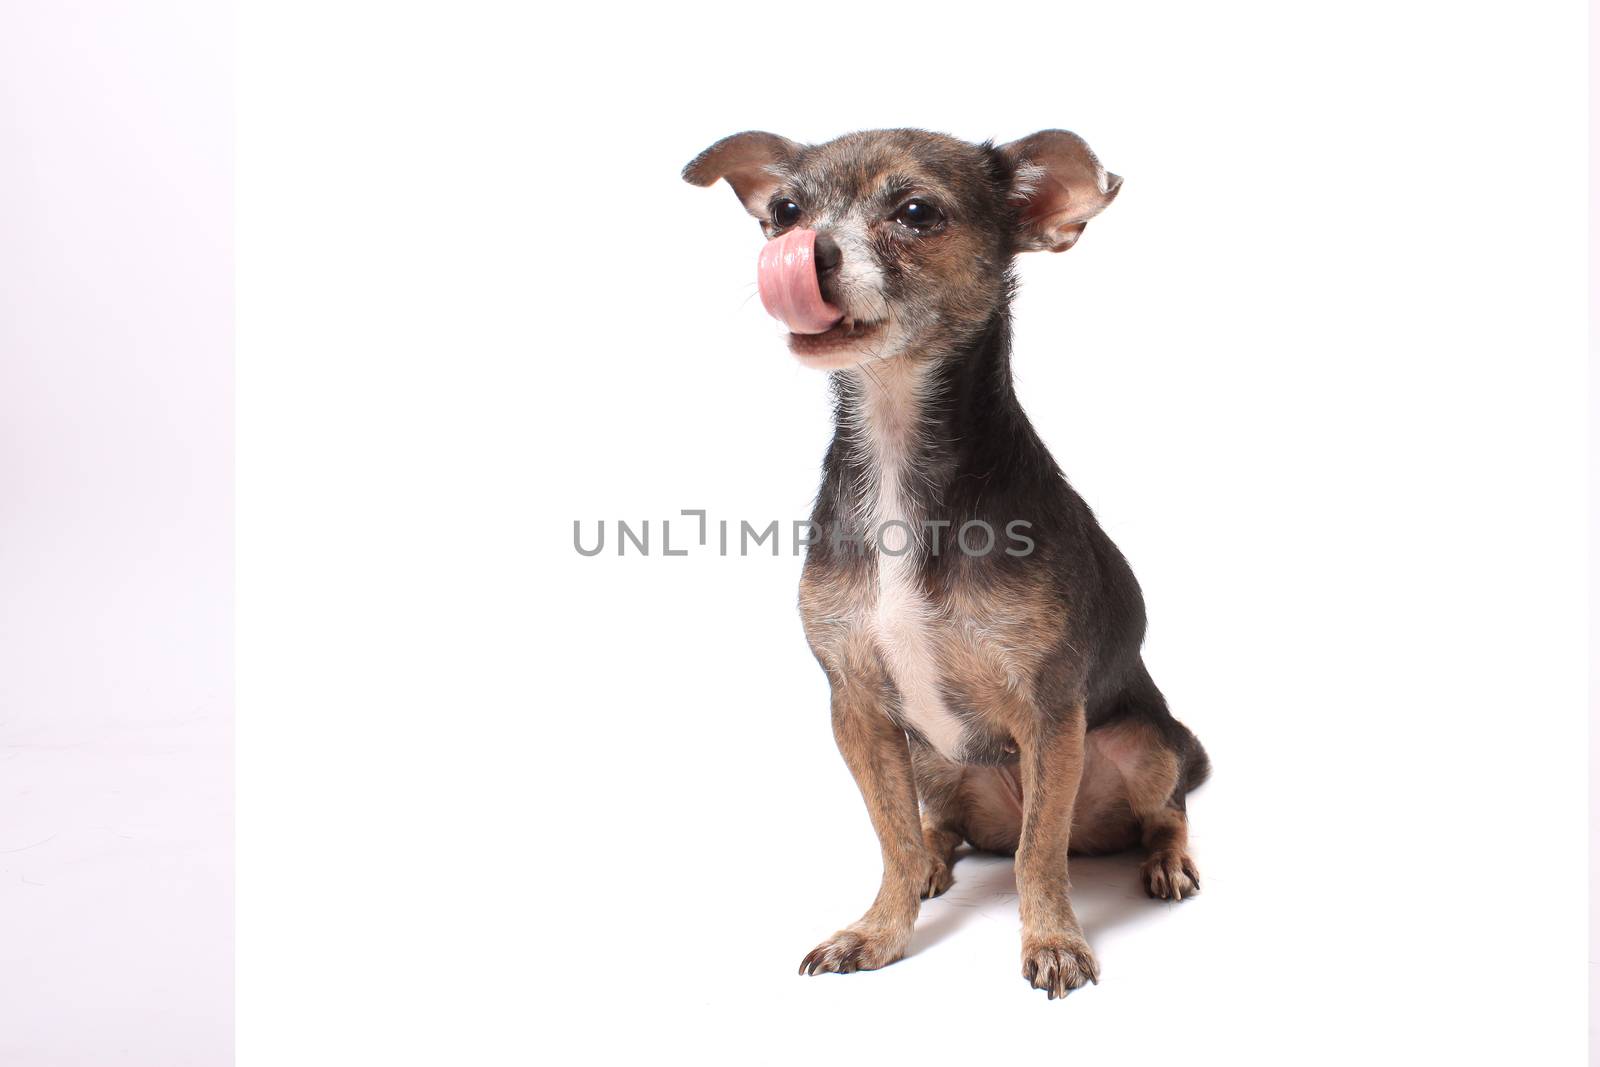 Cute little chihuahua dog with tongue licking his nose on a white background